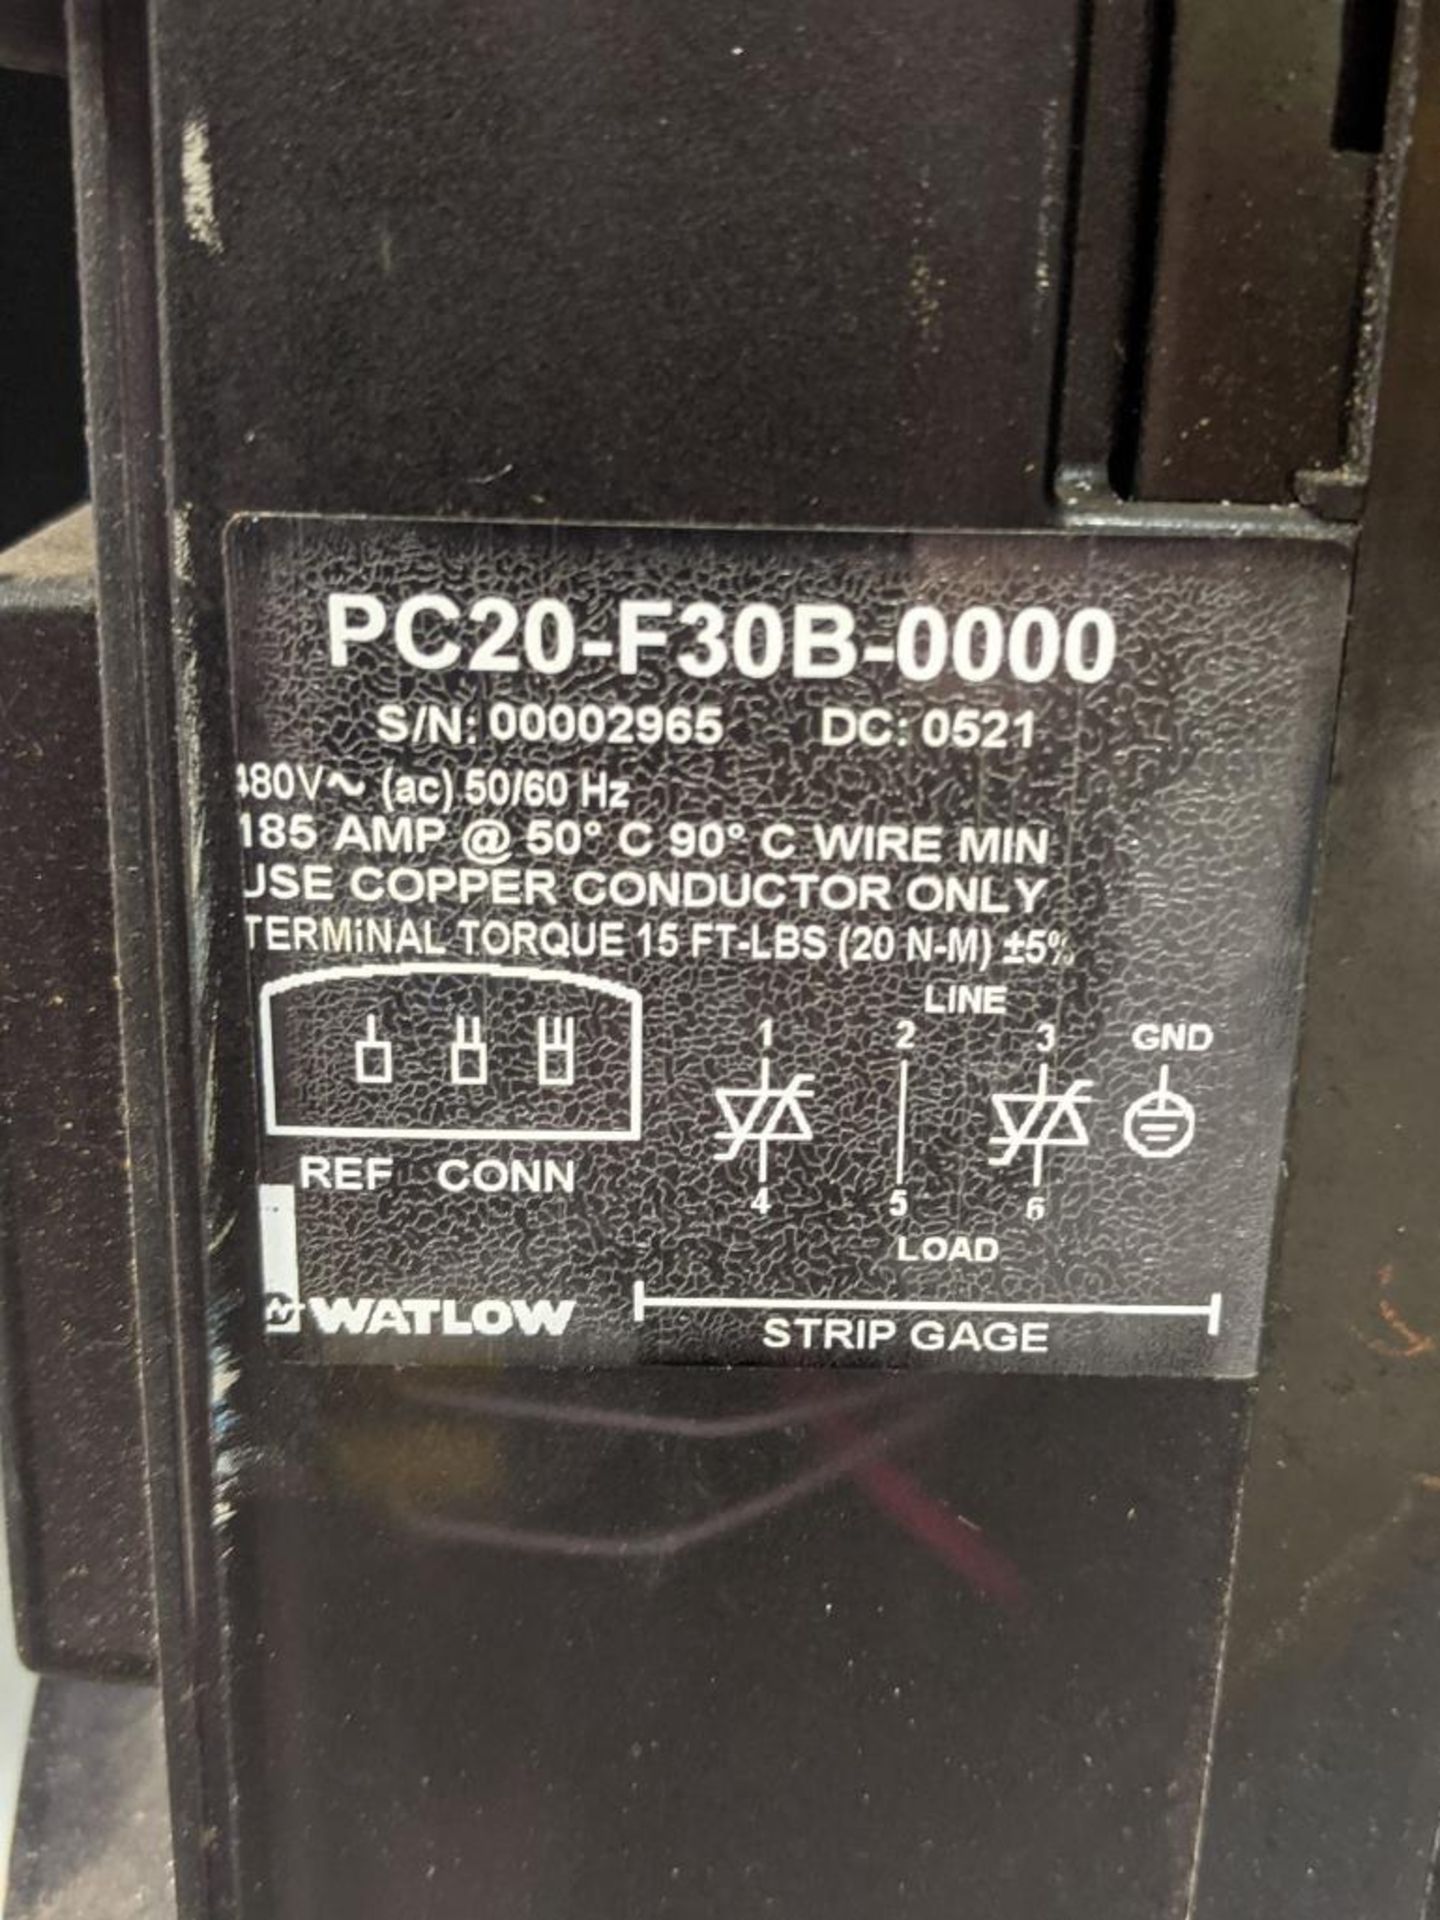 Watlow Model PC20-F30B-0000 Microprocessor Solid State Power Controller - Image 2 of 2